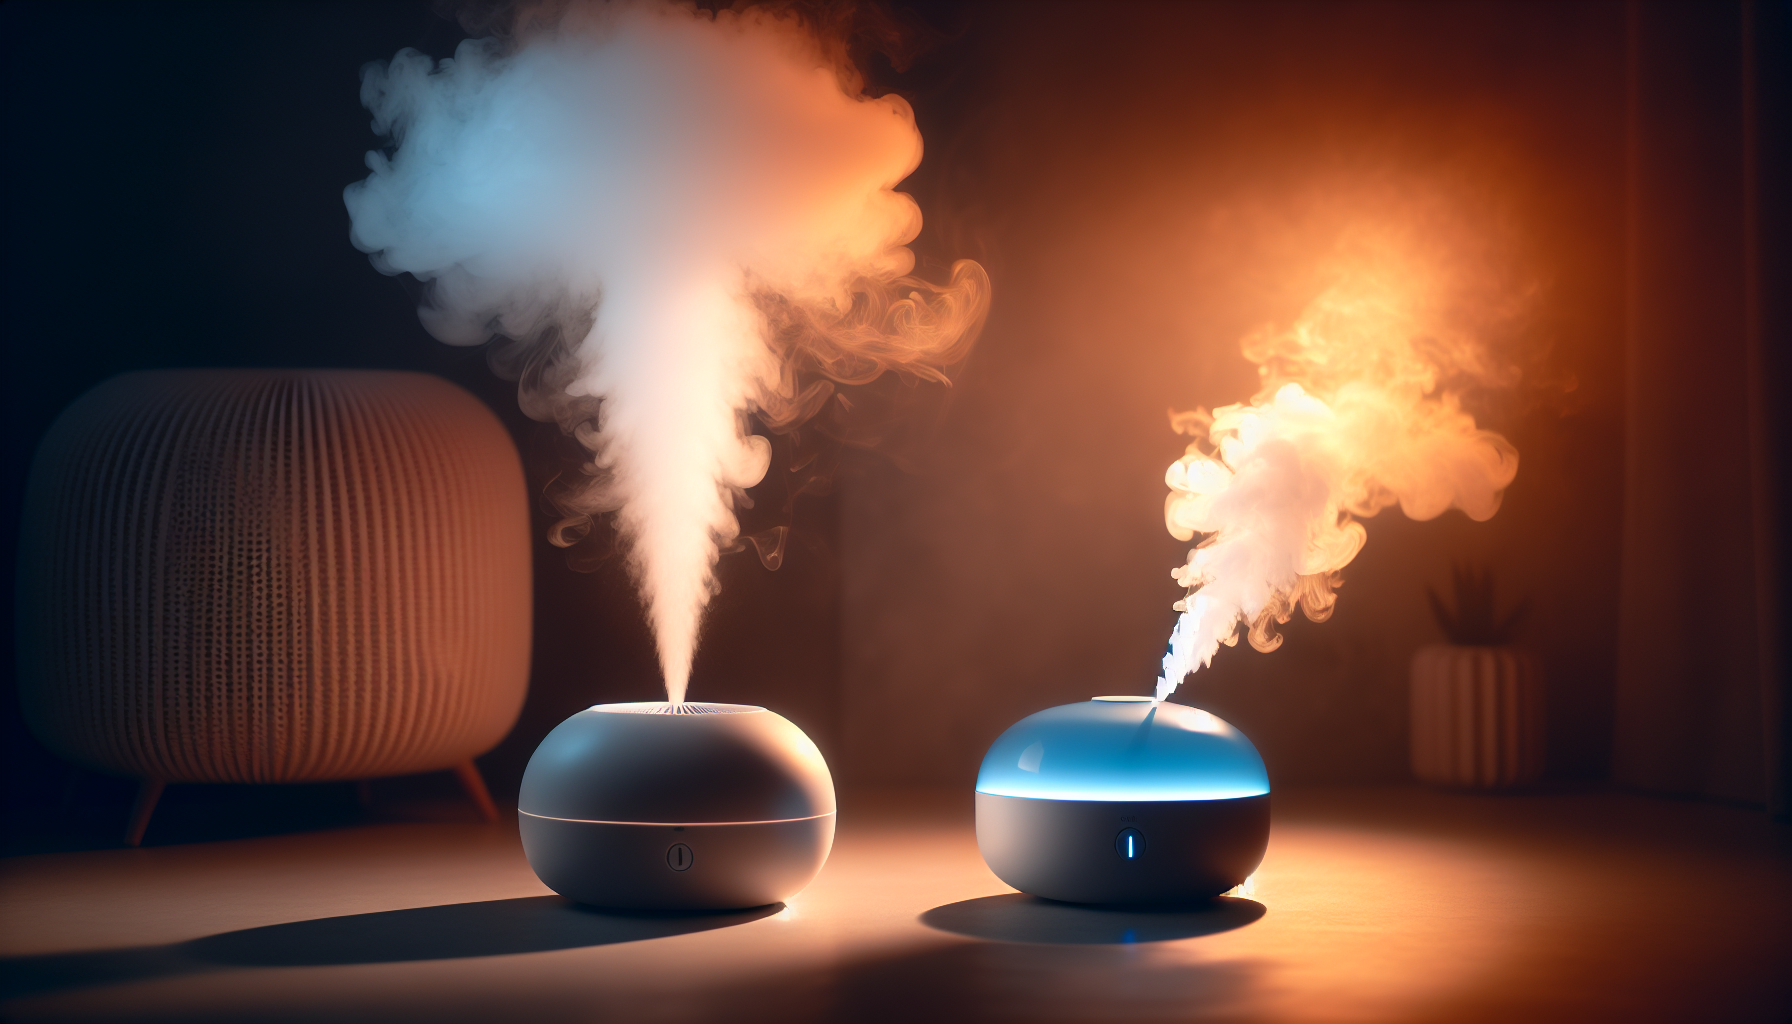 Two mist humidifiers, one emitting cool mist and the other warm mist